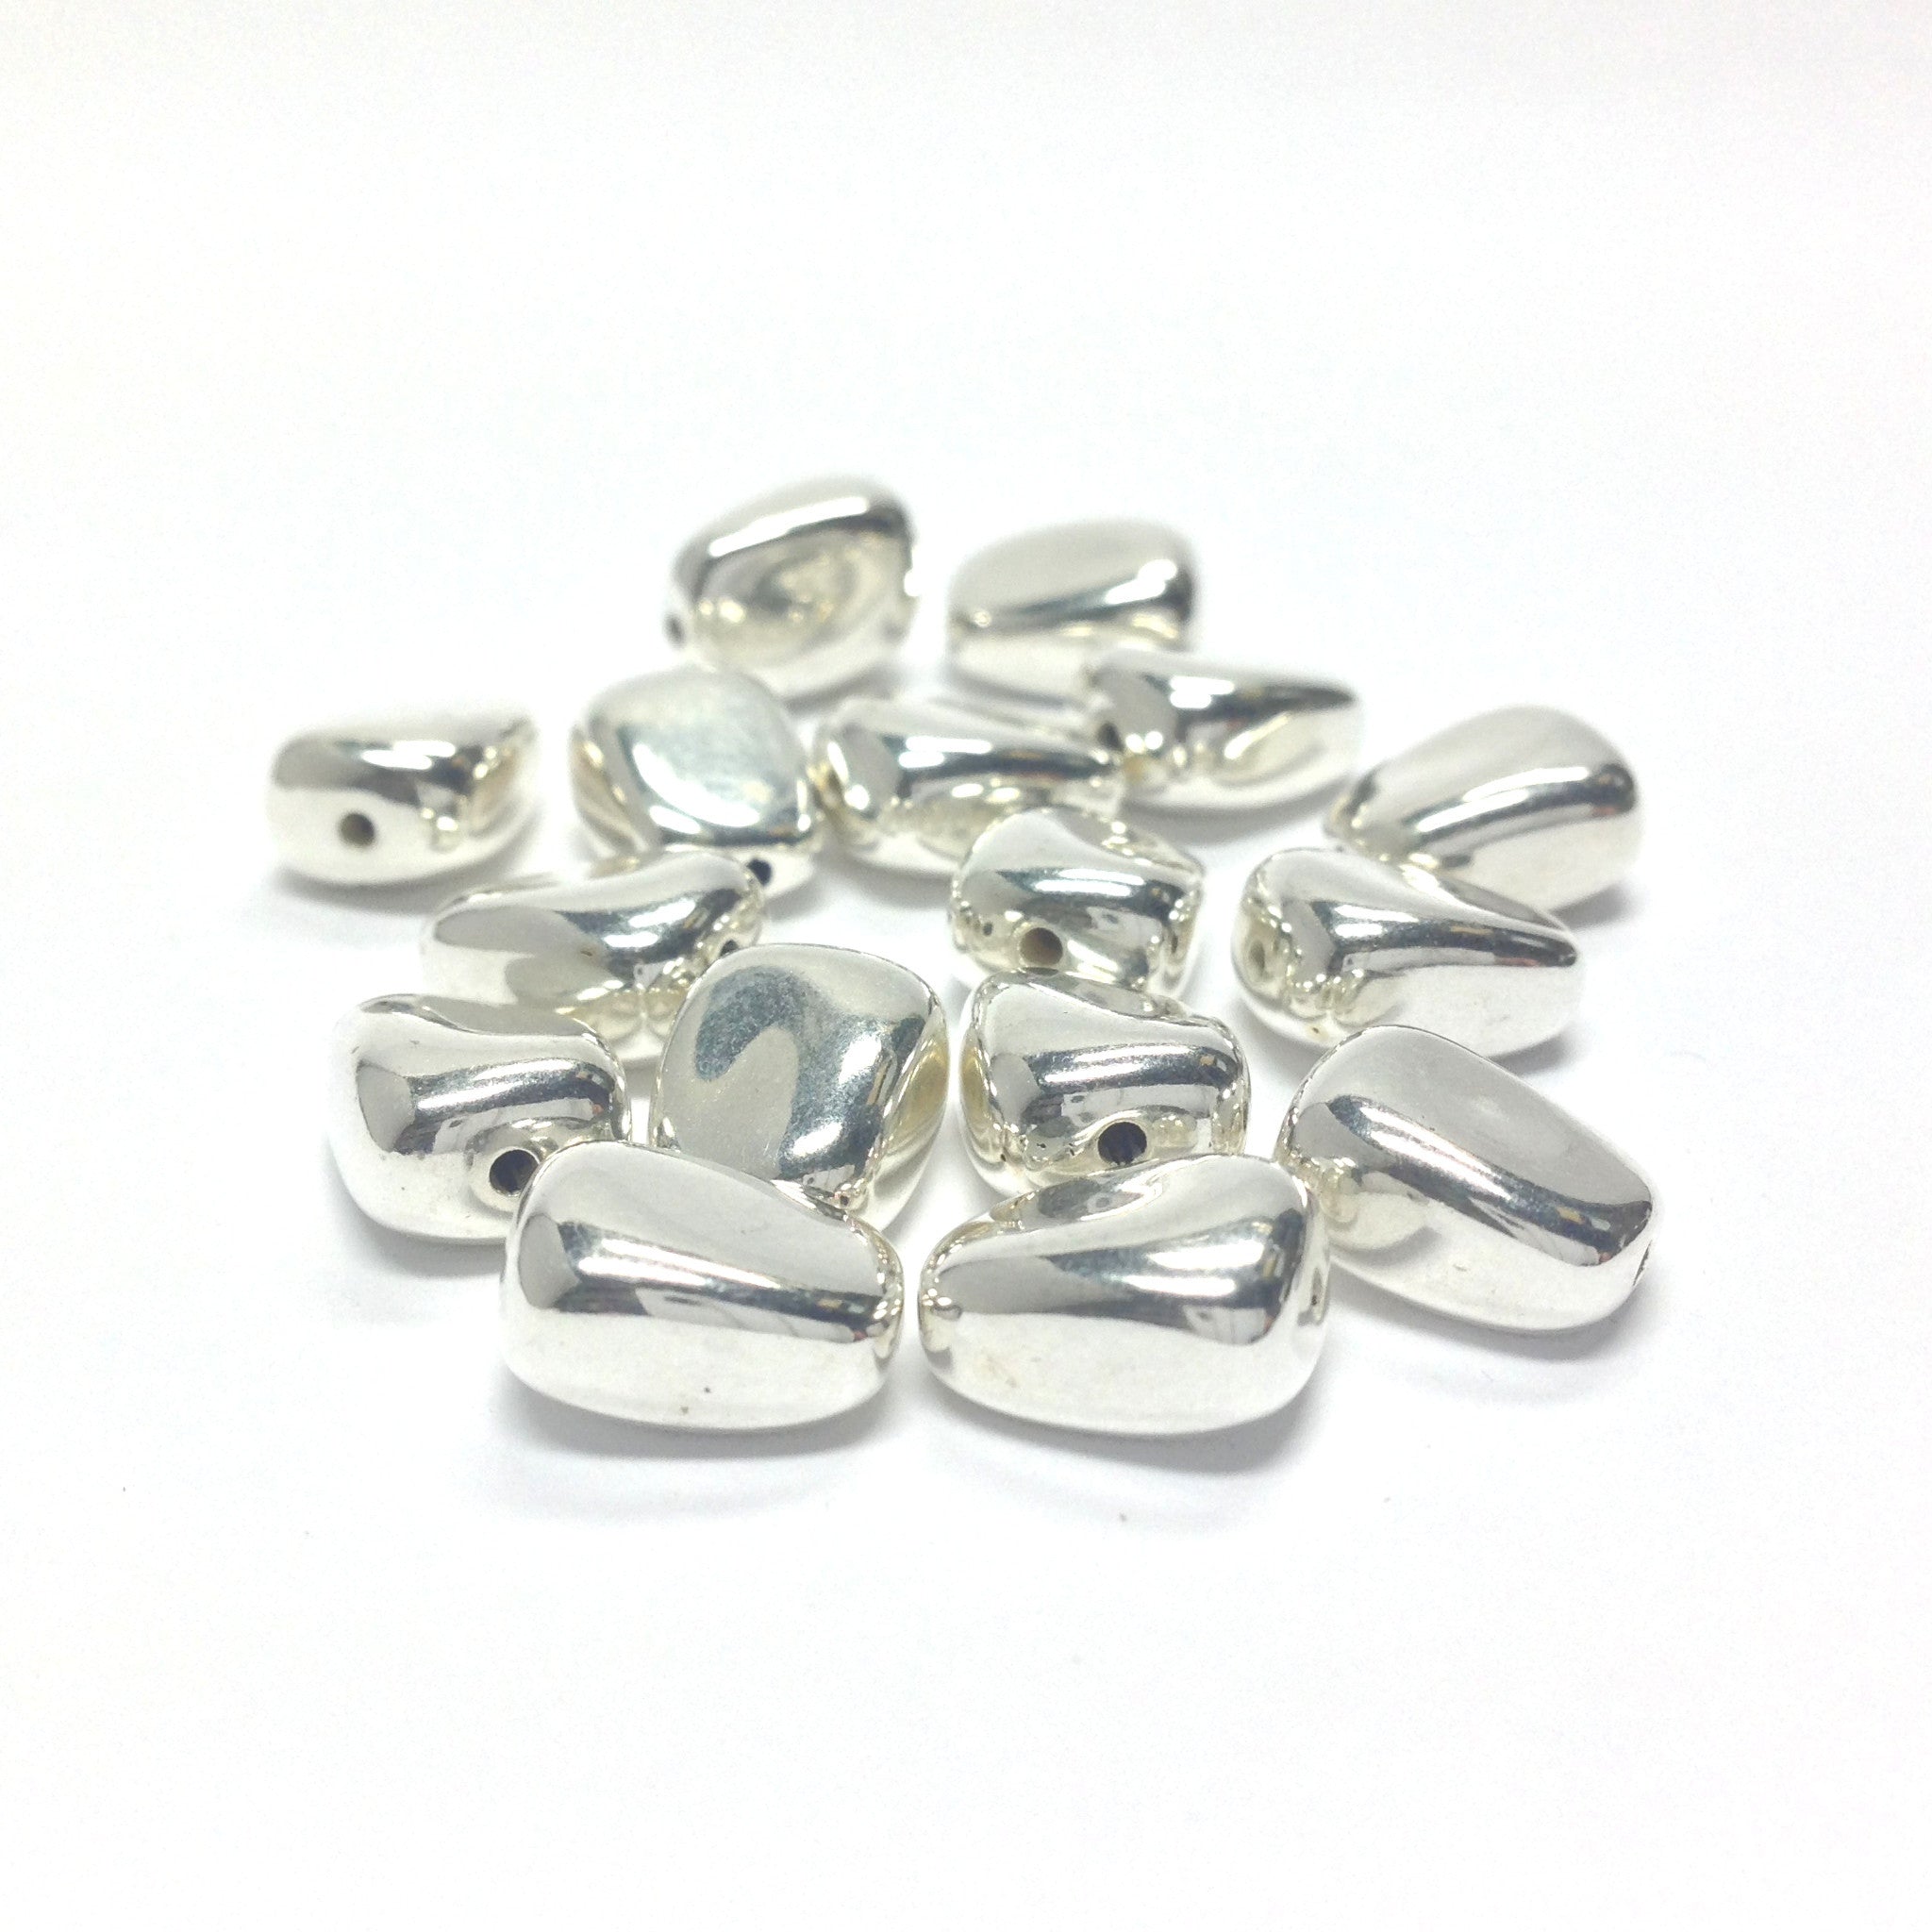 Silver Nugget 6mm Spacer Beads + Large 2mm Hole for Leather